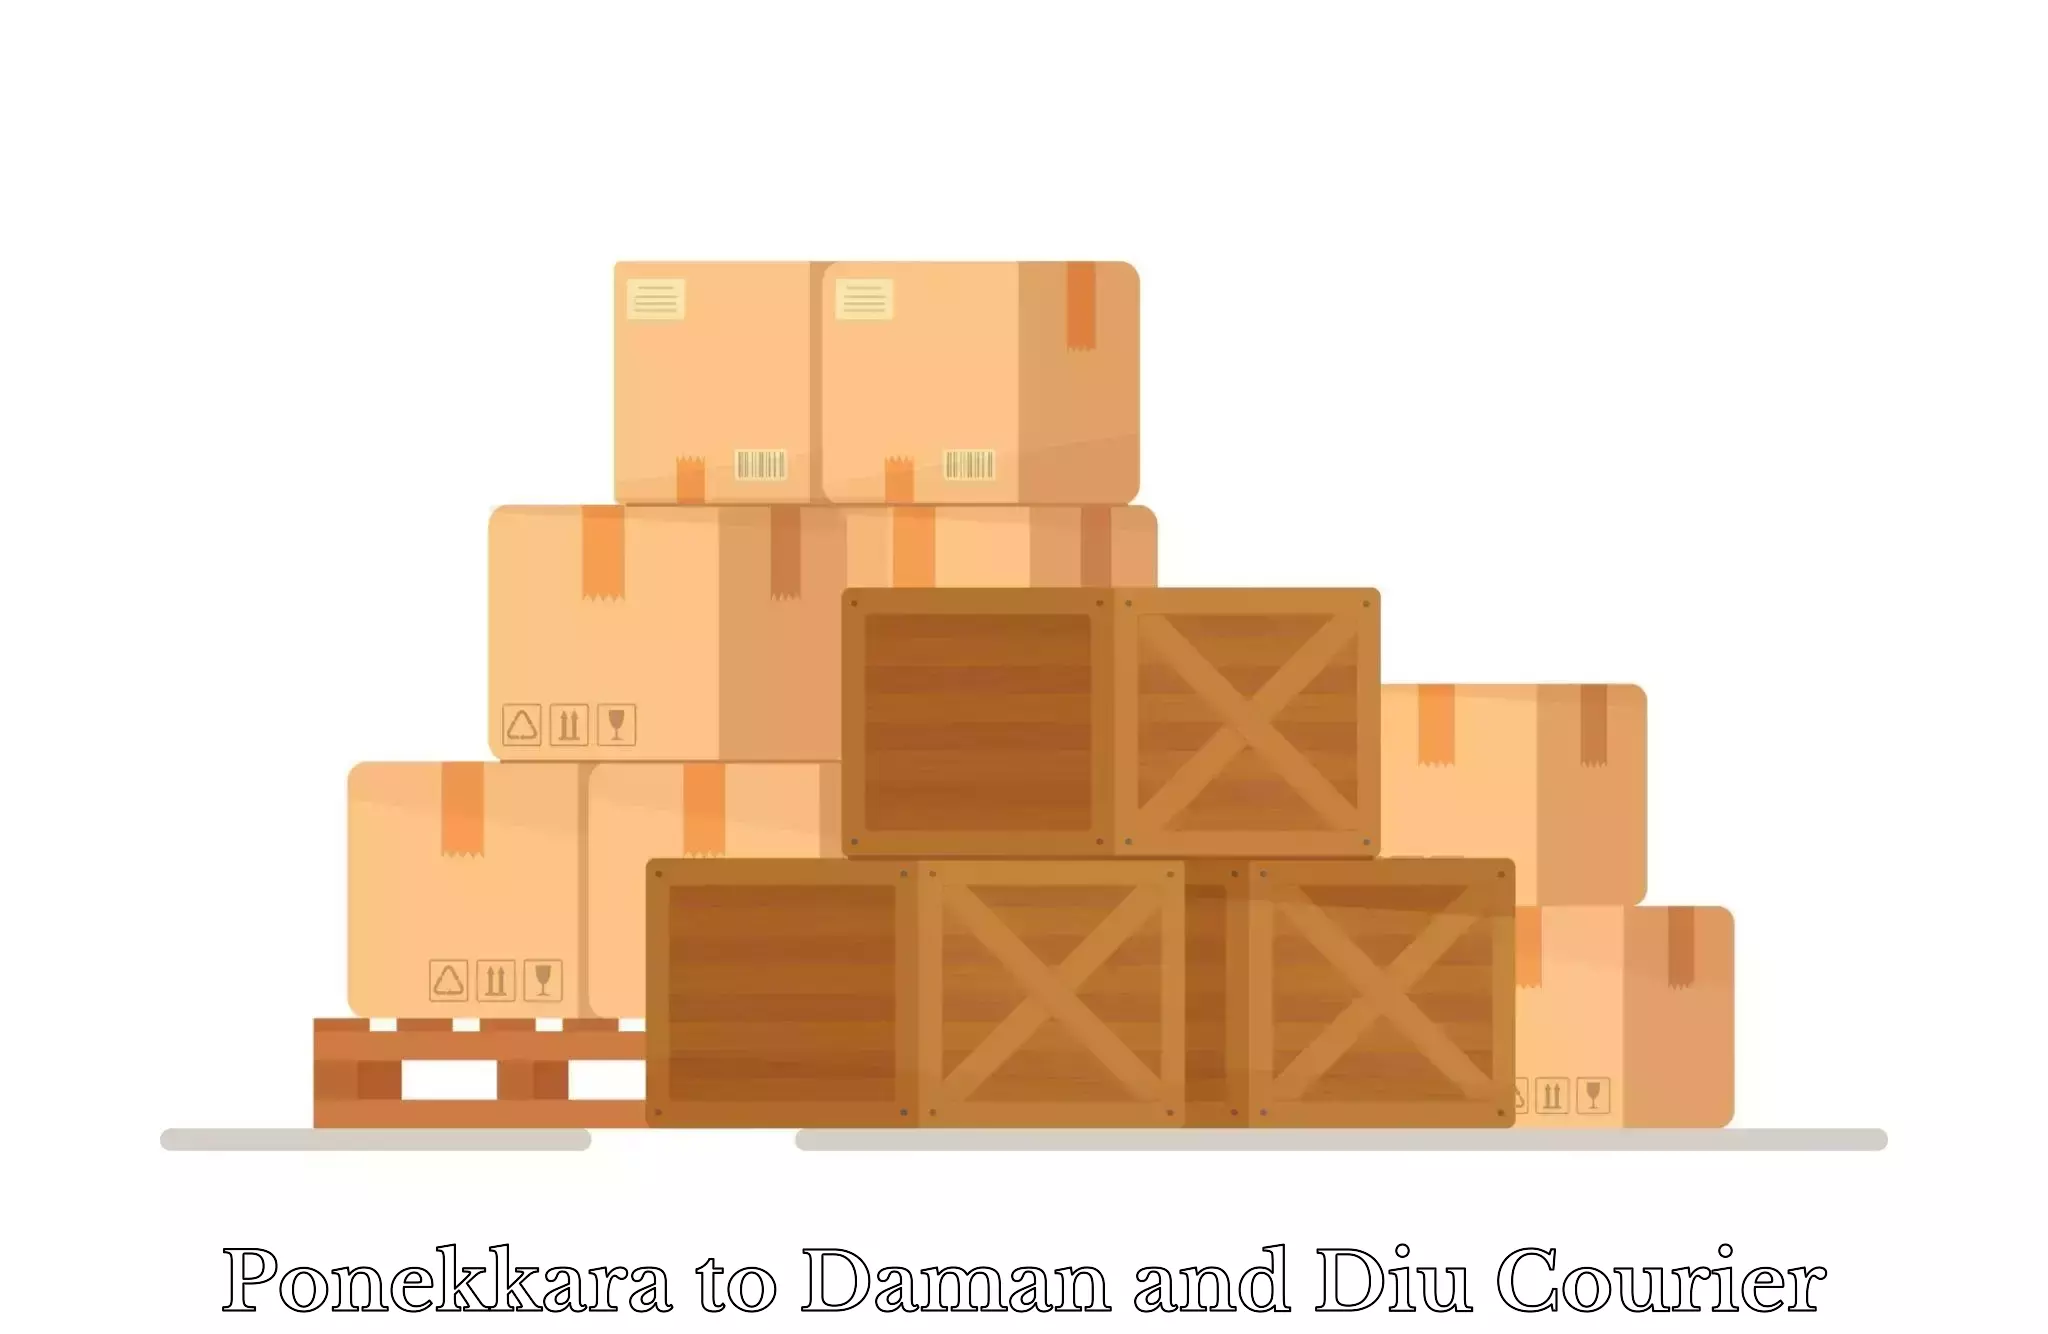 Luggage storage and delivery Ponekkara to Daman and Diu